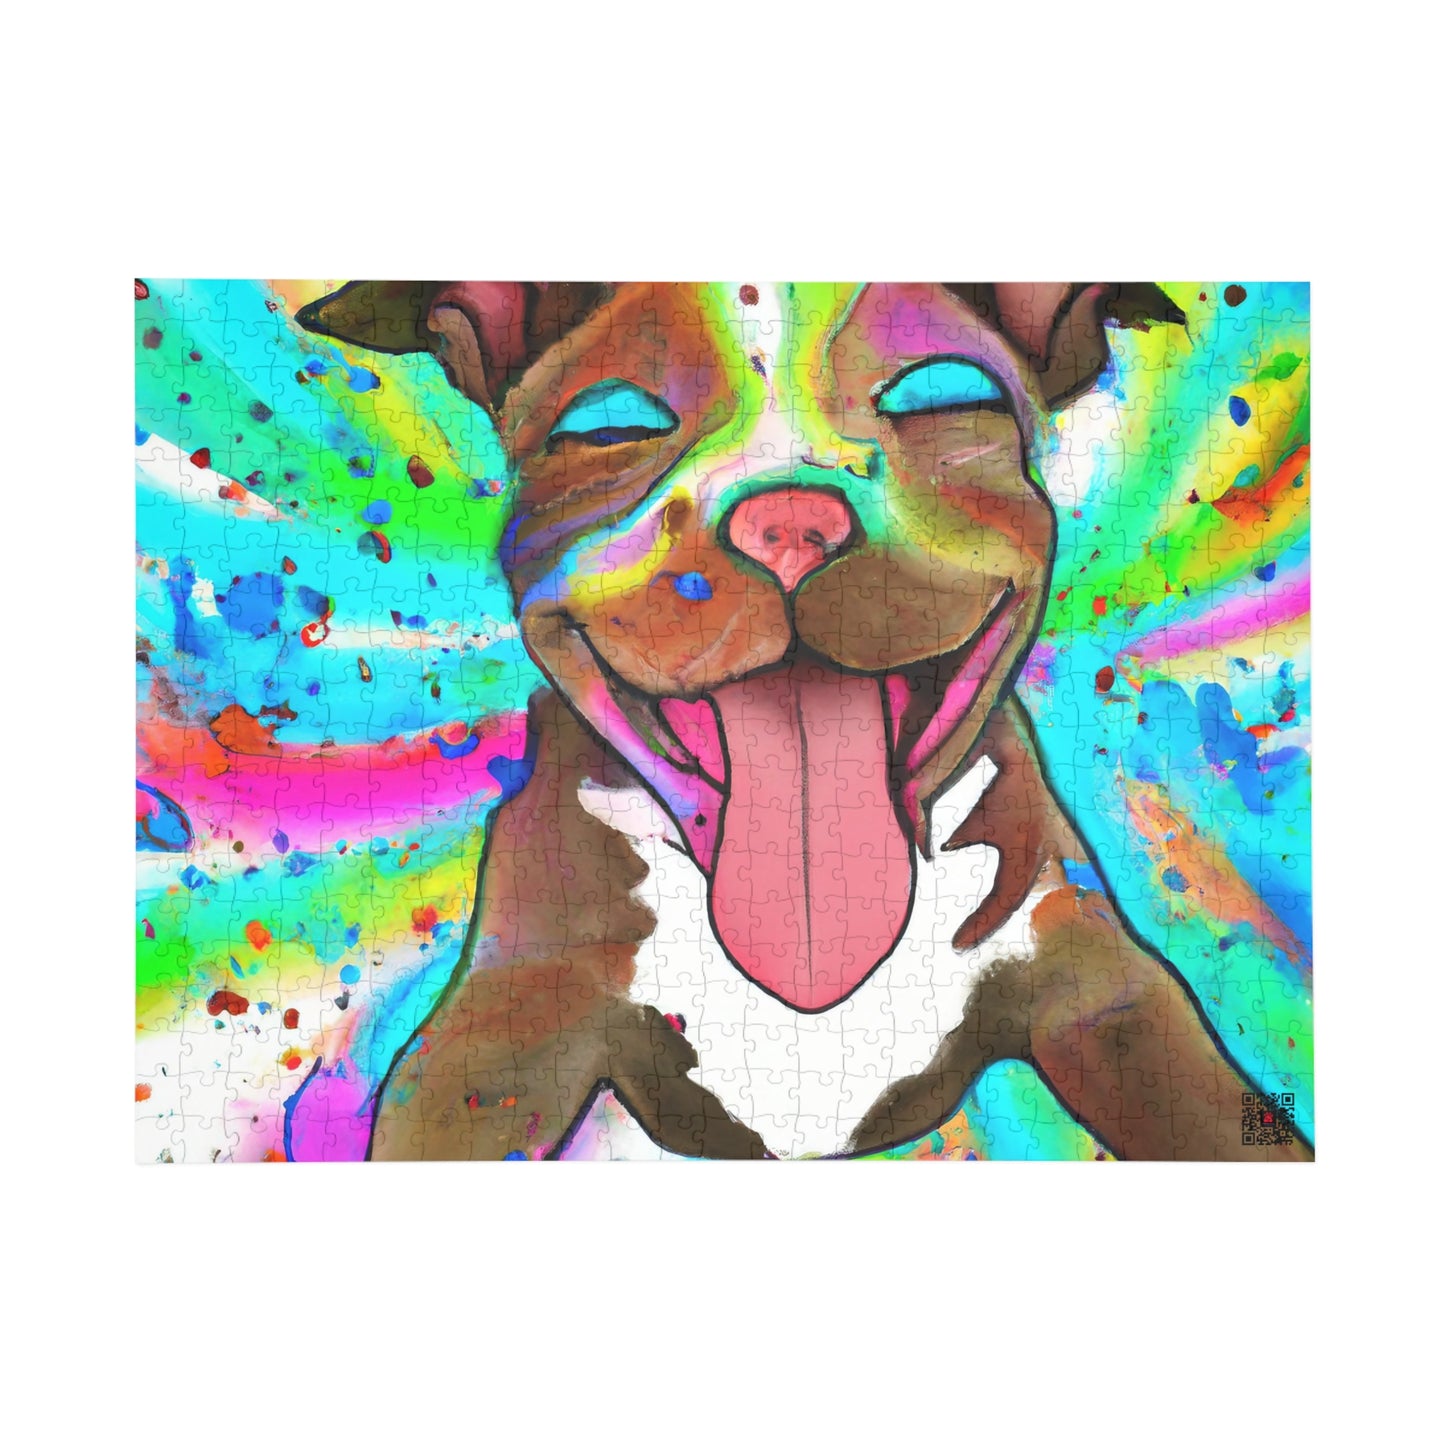 Gustaf D'Royaume - Pitbull Puppy - Puzzle